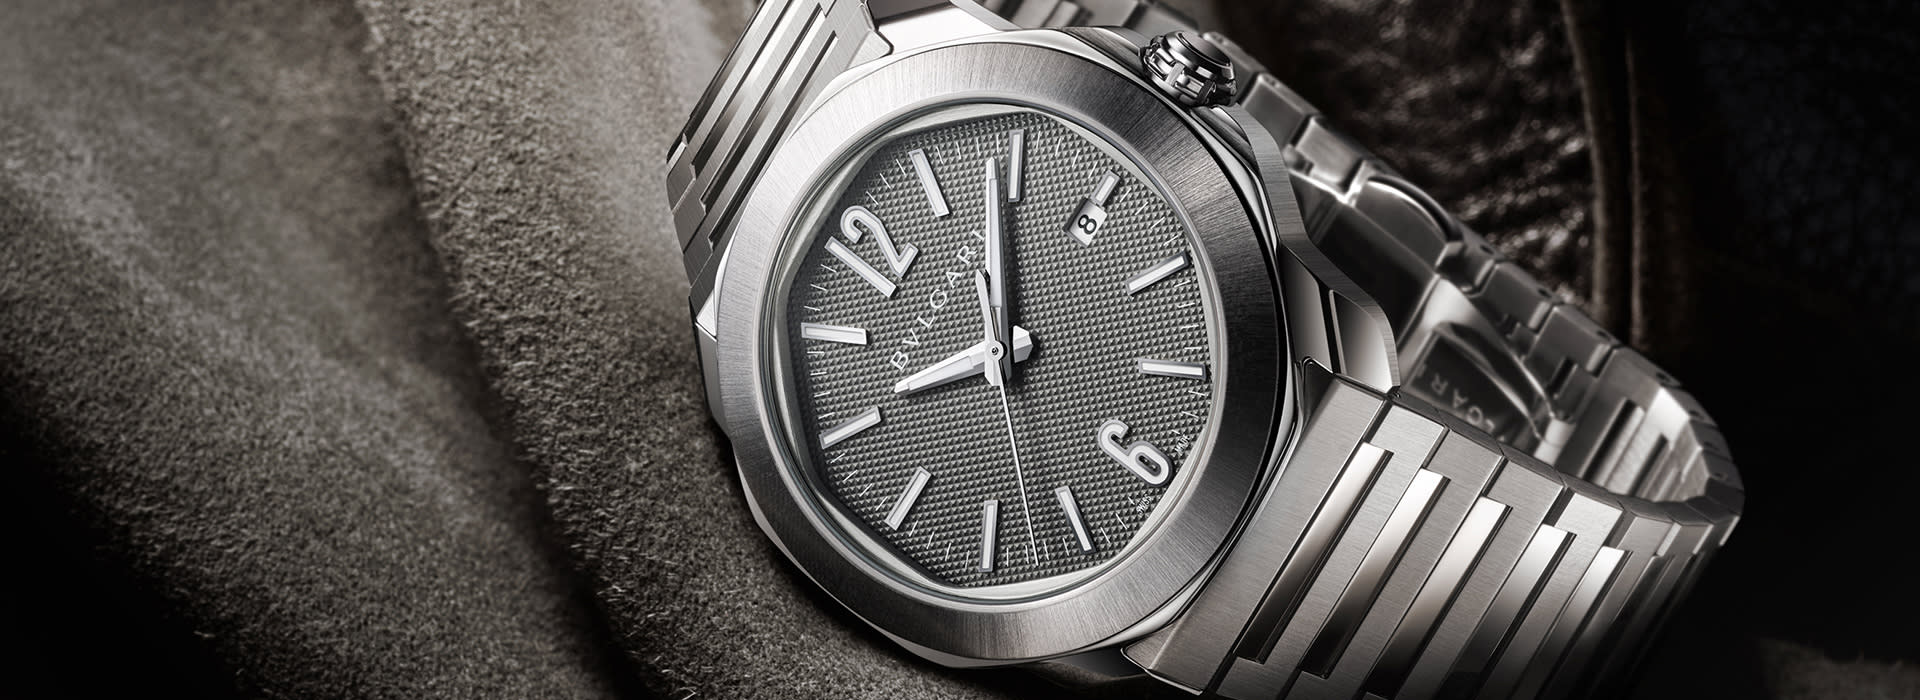 Octo Roma watch in stainless steel with self-winding movement and anthracite dial, creative shot.